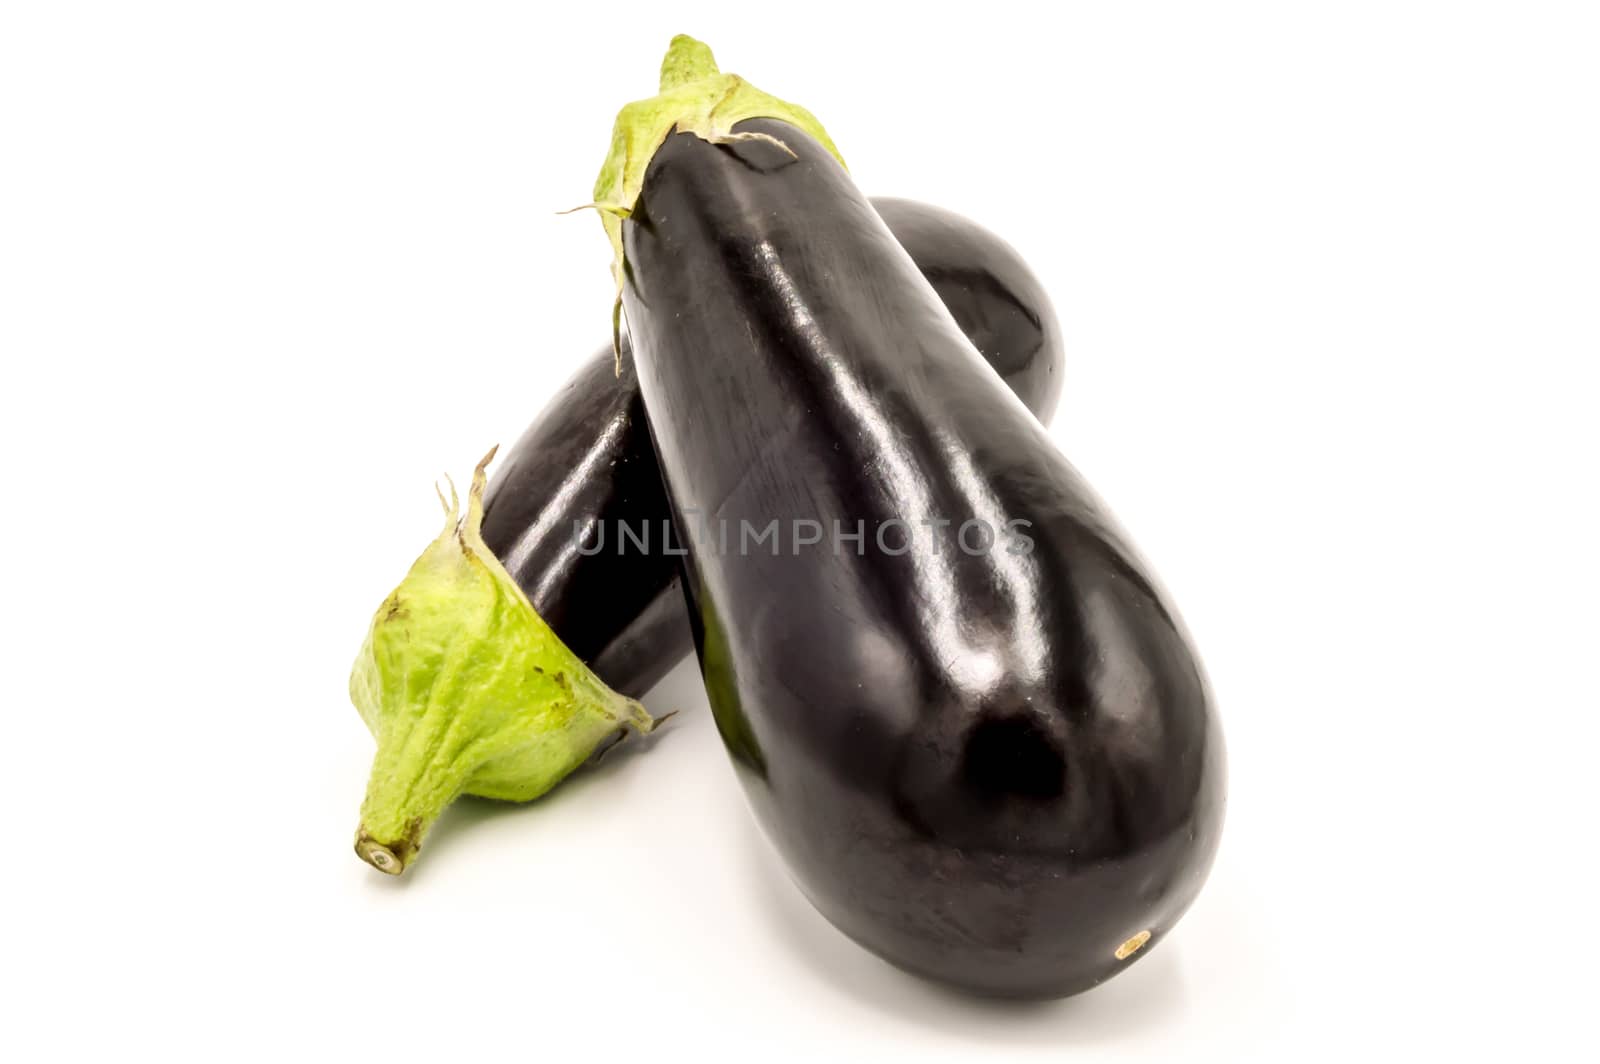 Eggplant or aubergine vegetable isolated  by Philou1000